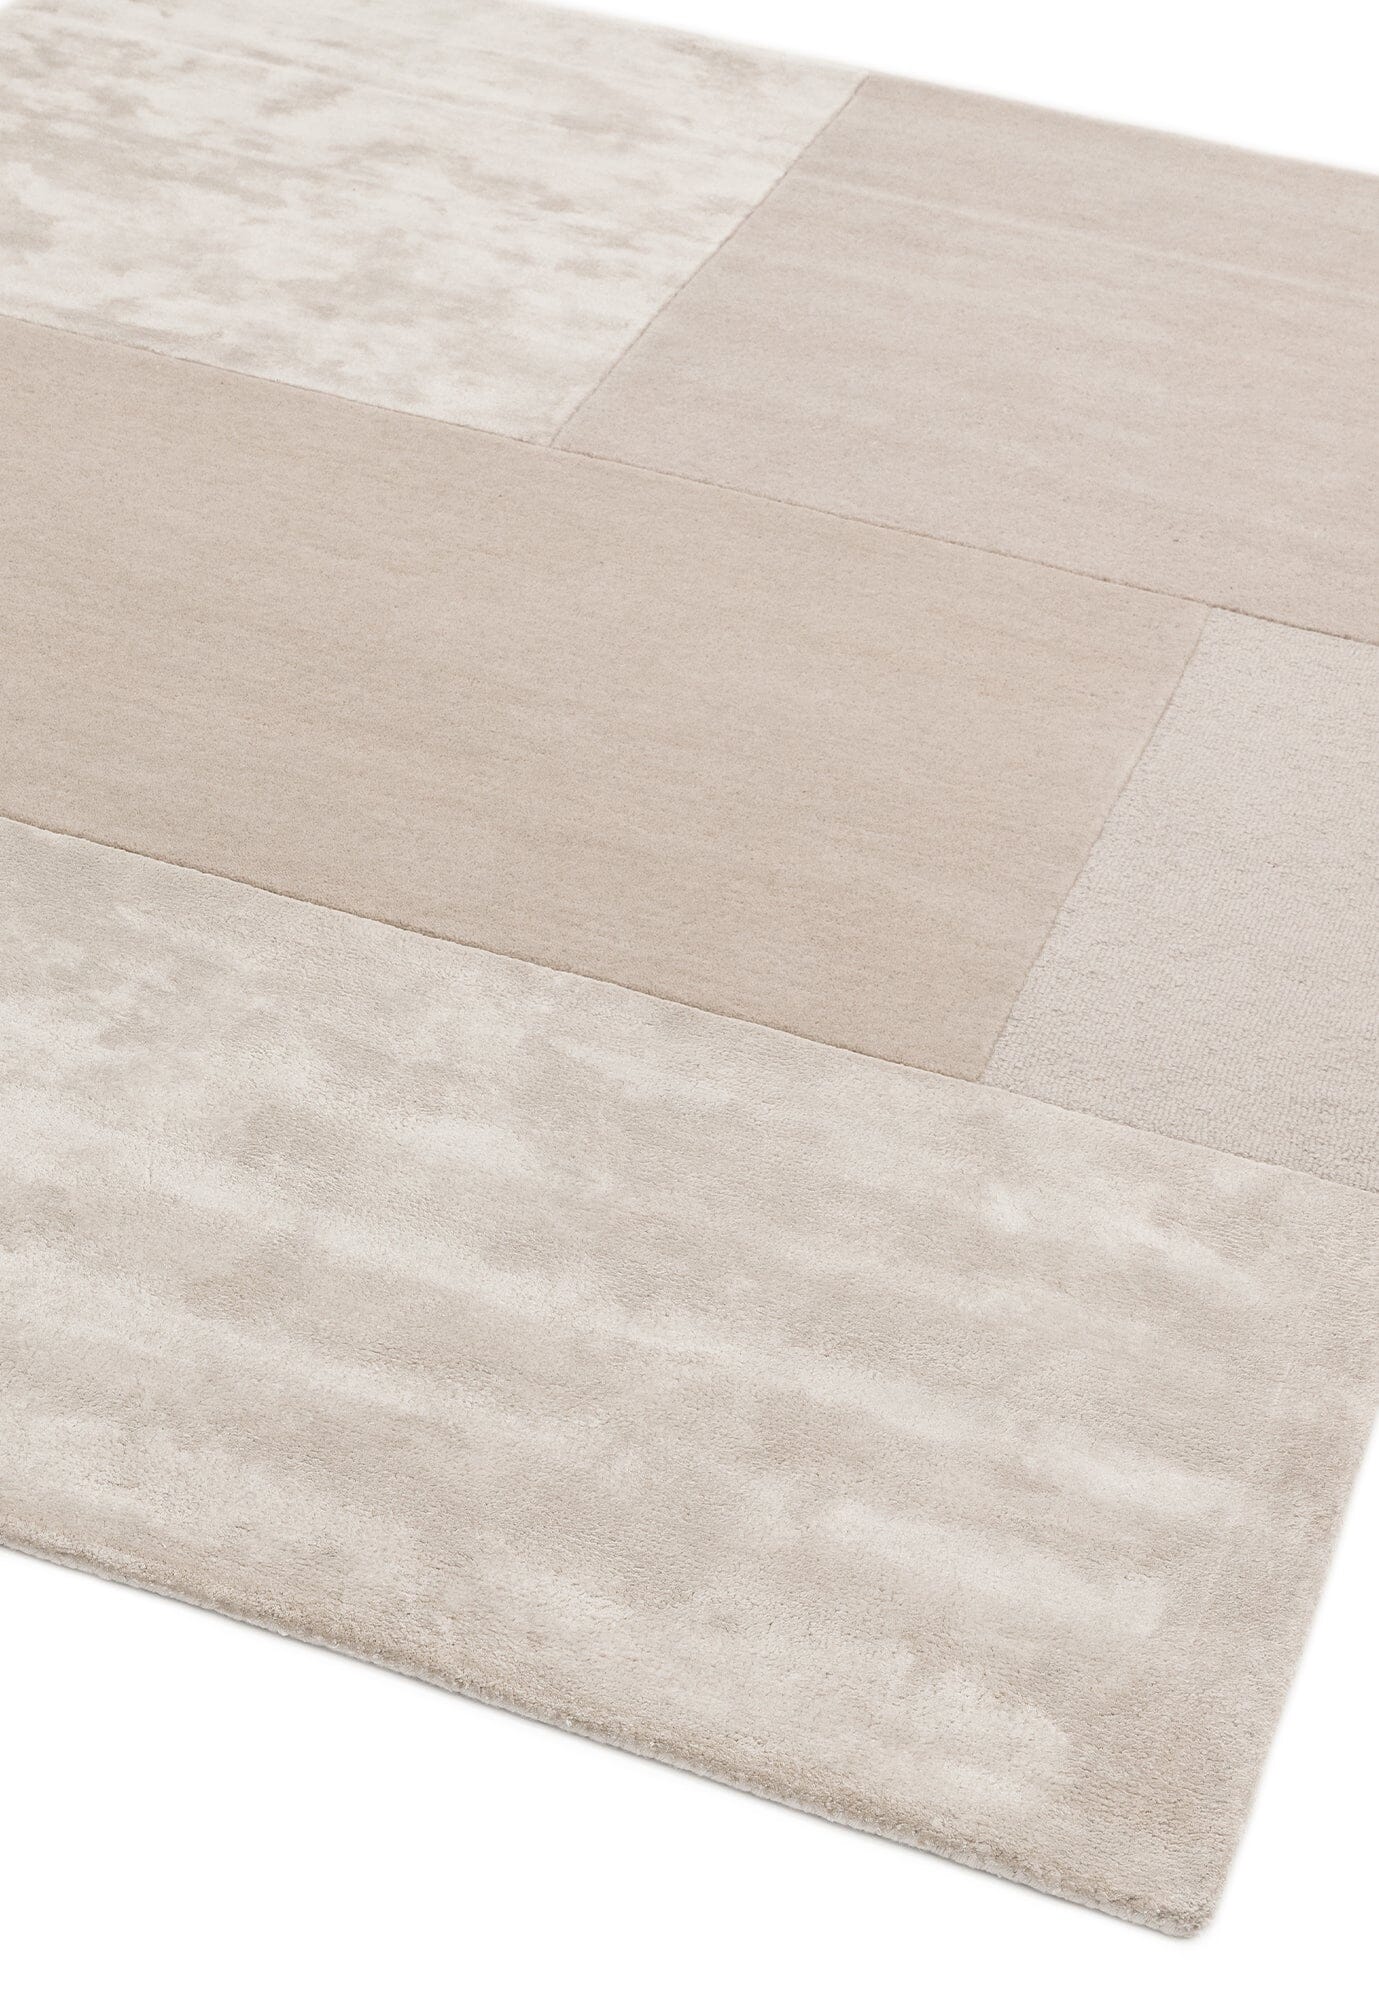 Asiatic Carpets Tate Tonal Textures Hand Tufted Rug Ivory - 160 x 230cm